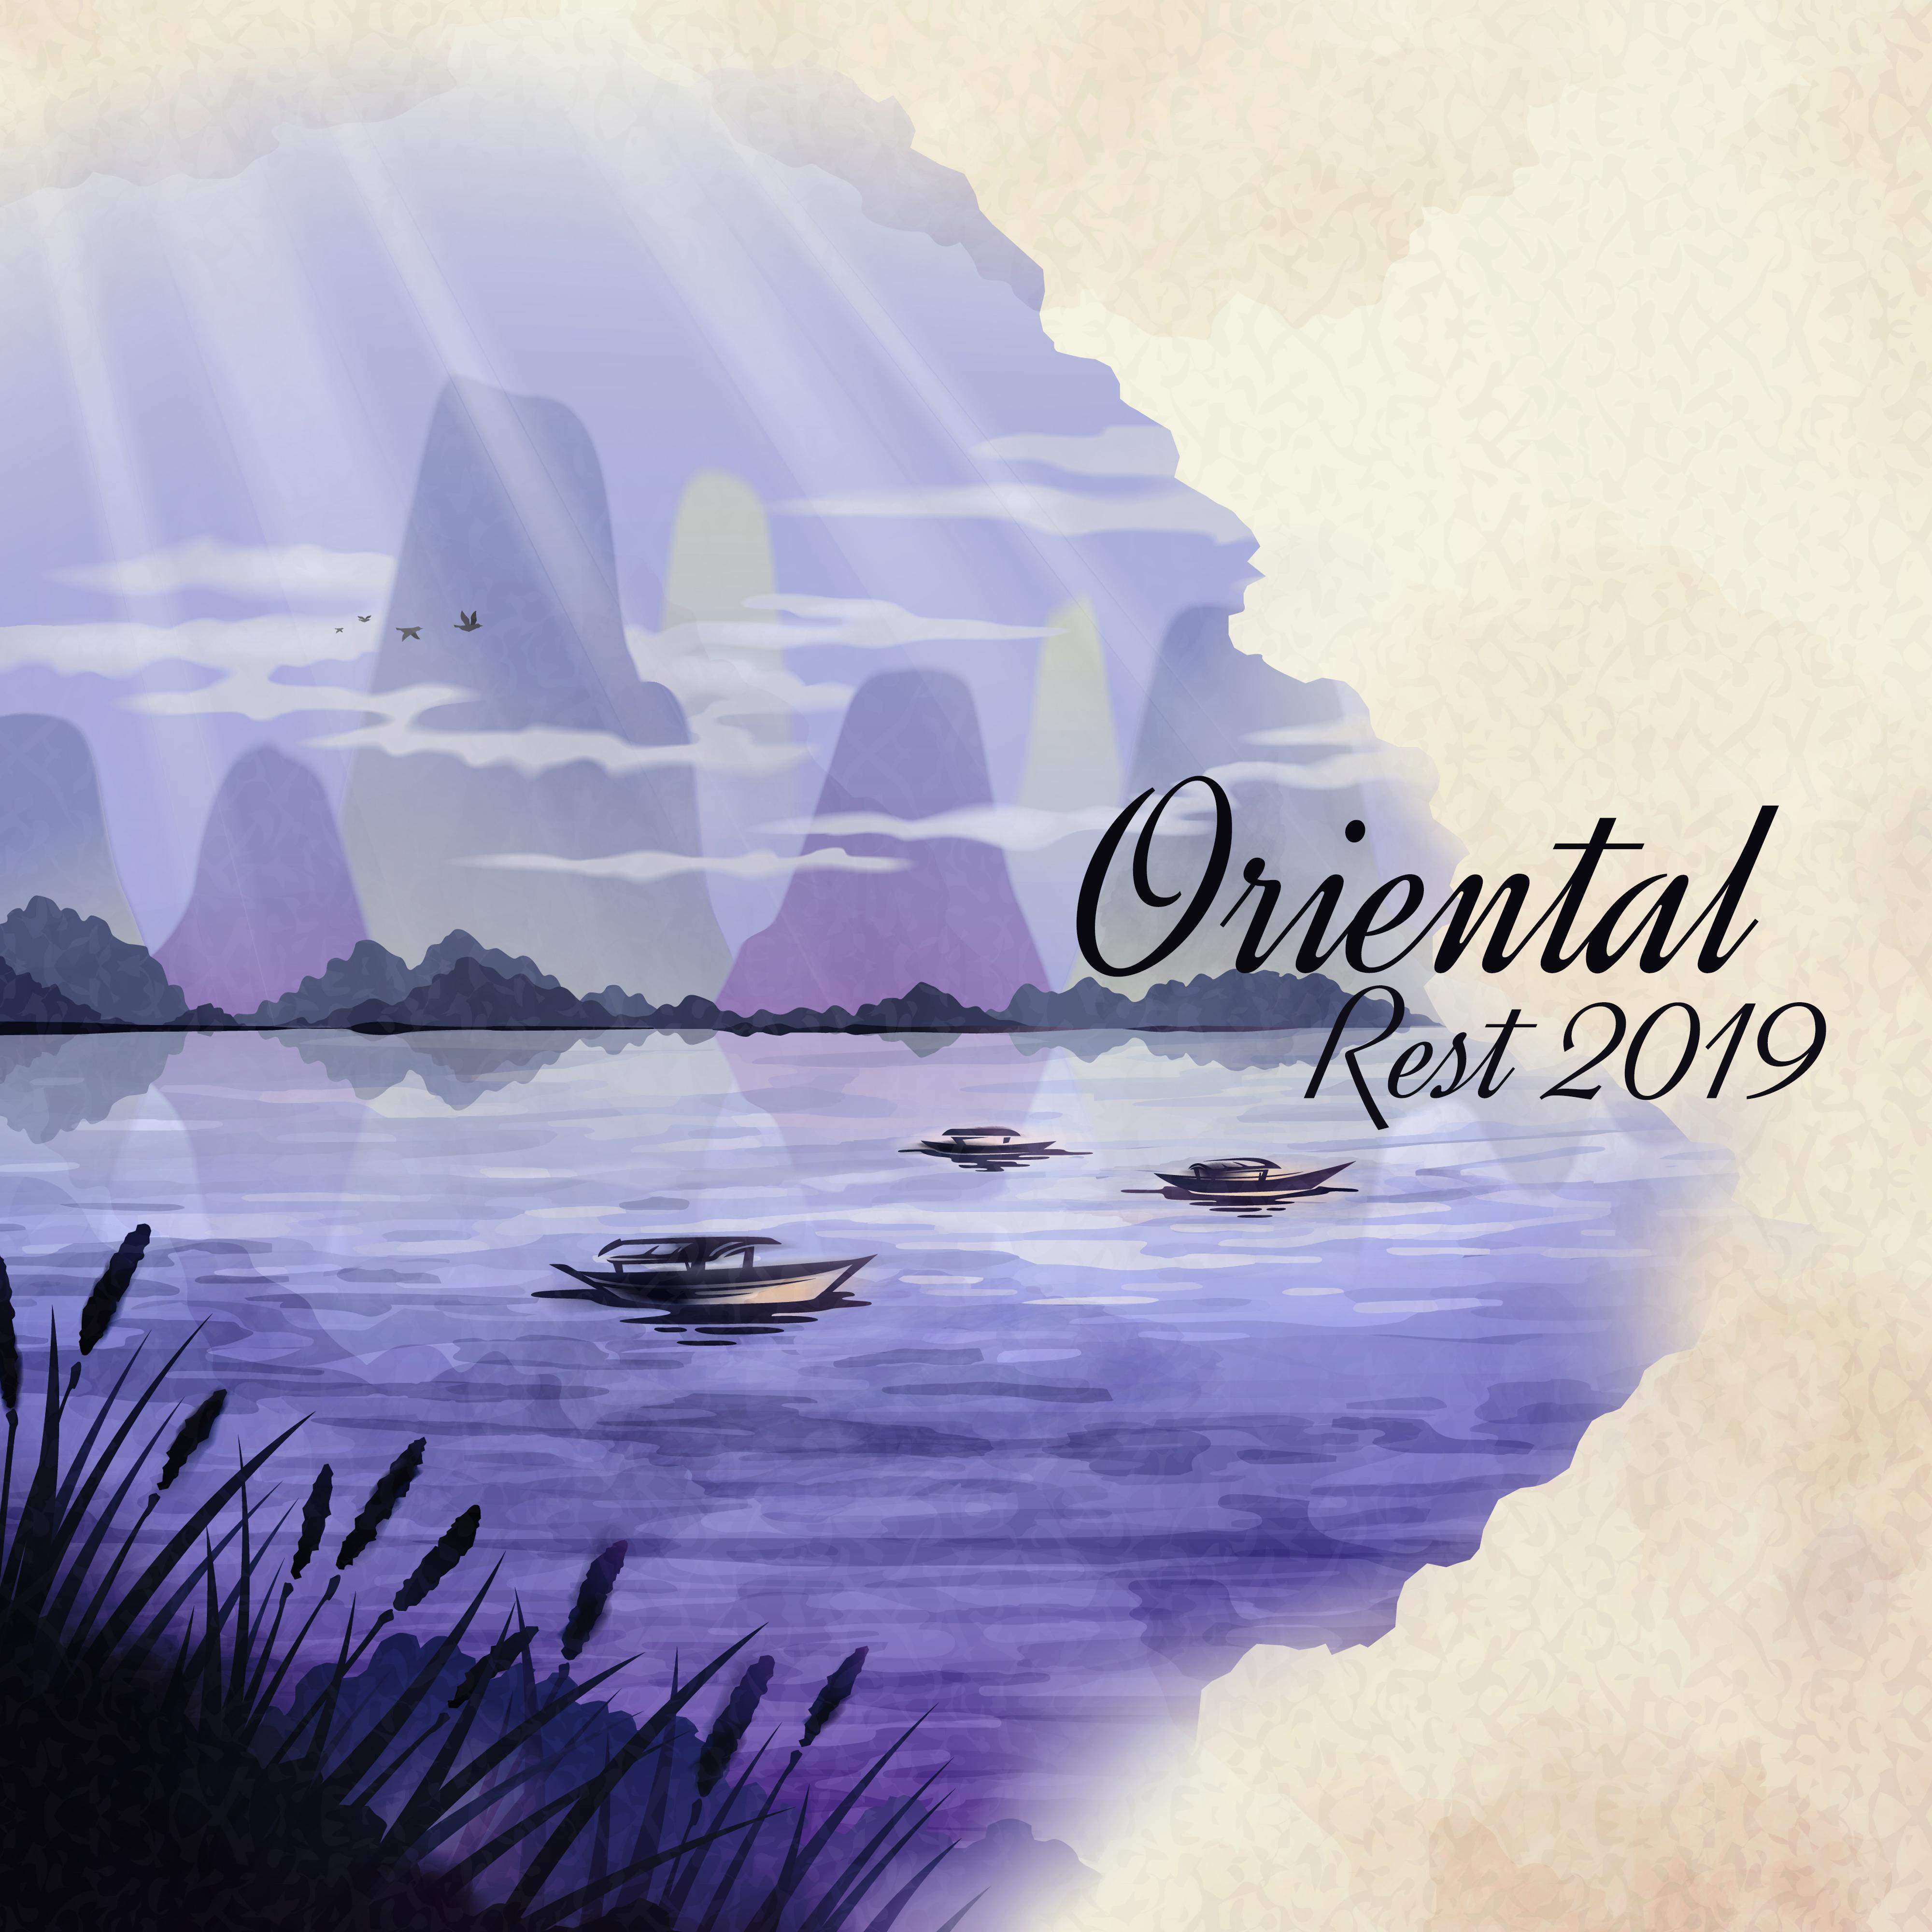 Oriental Rest 2019 – Compilation of Deep Relaxation Music, Sleep, Full Calm Down, Stress Relief, Asian, Ambient & Nature Sounds